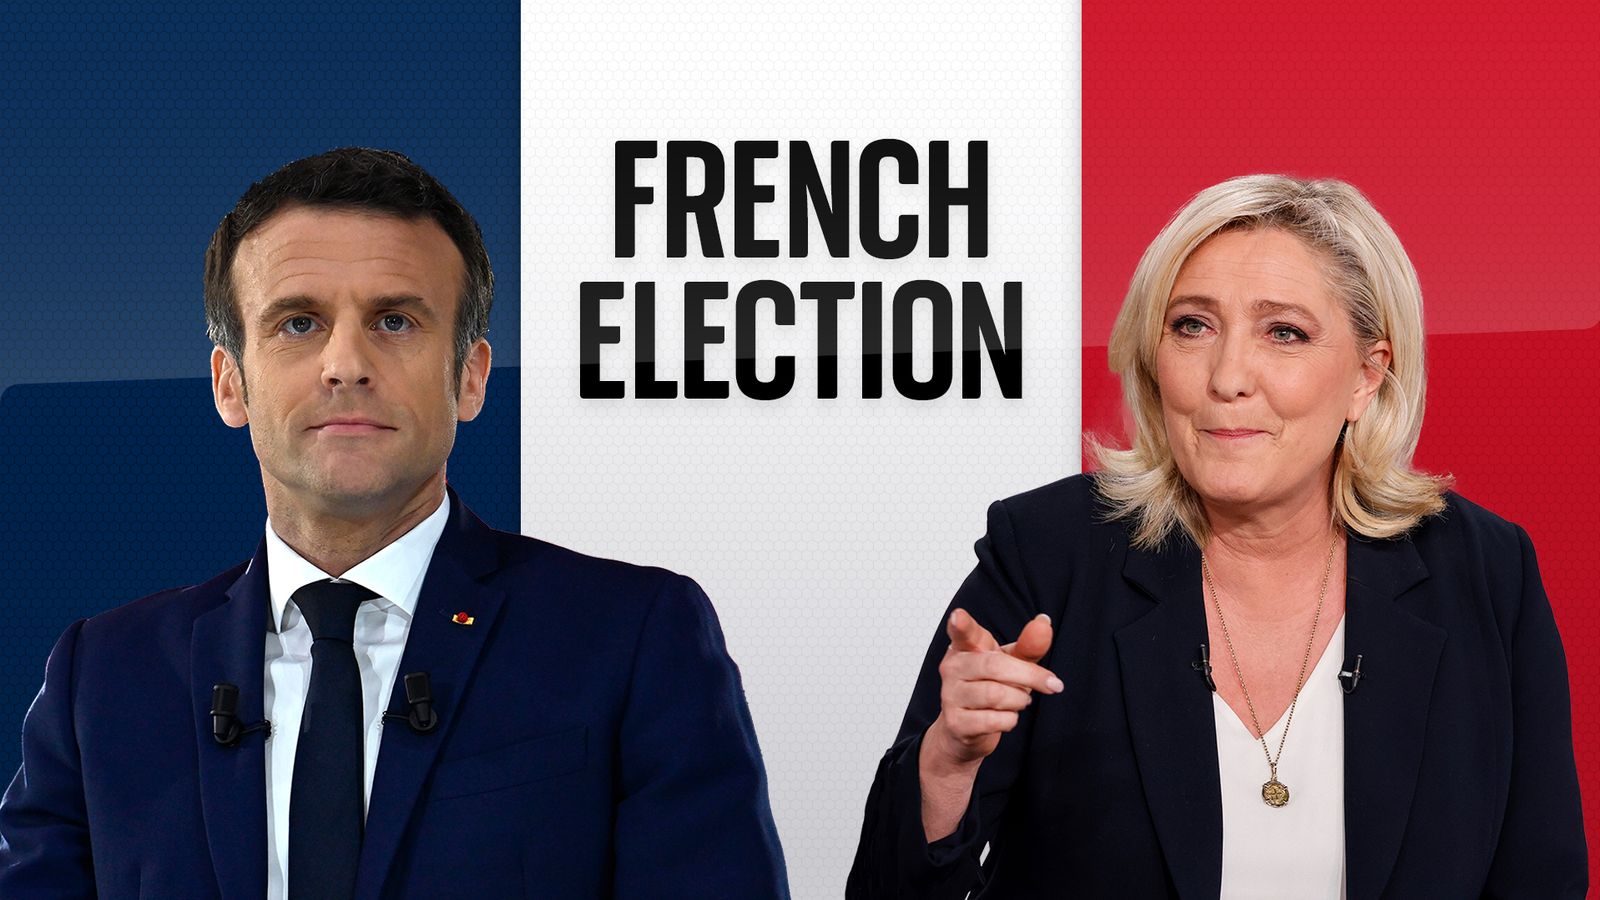 French election latest updates: Marine Le Pen concedes defeat in presidential race